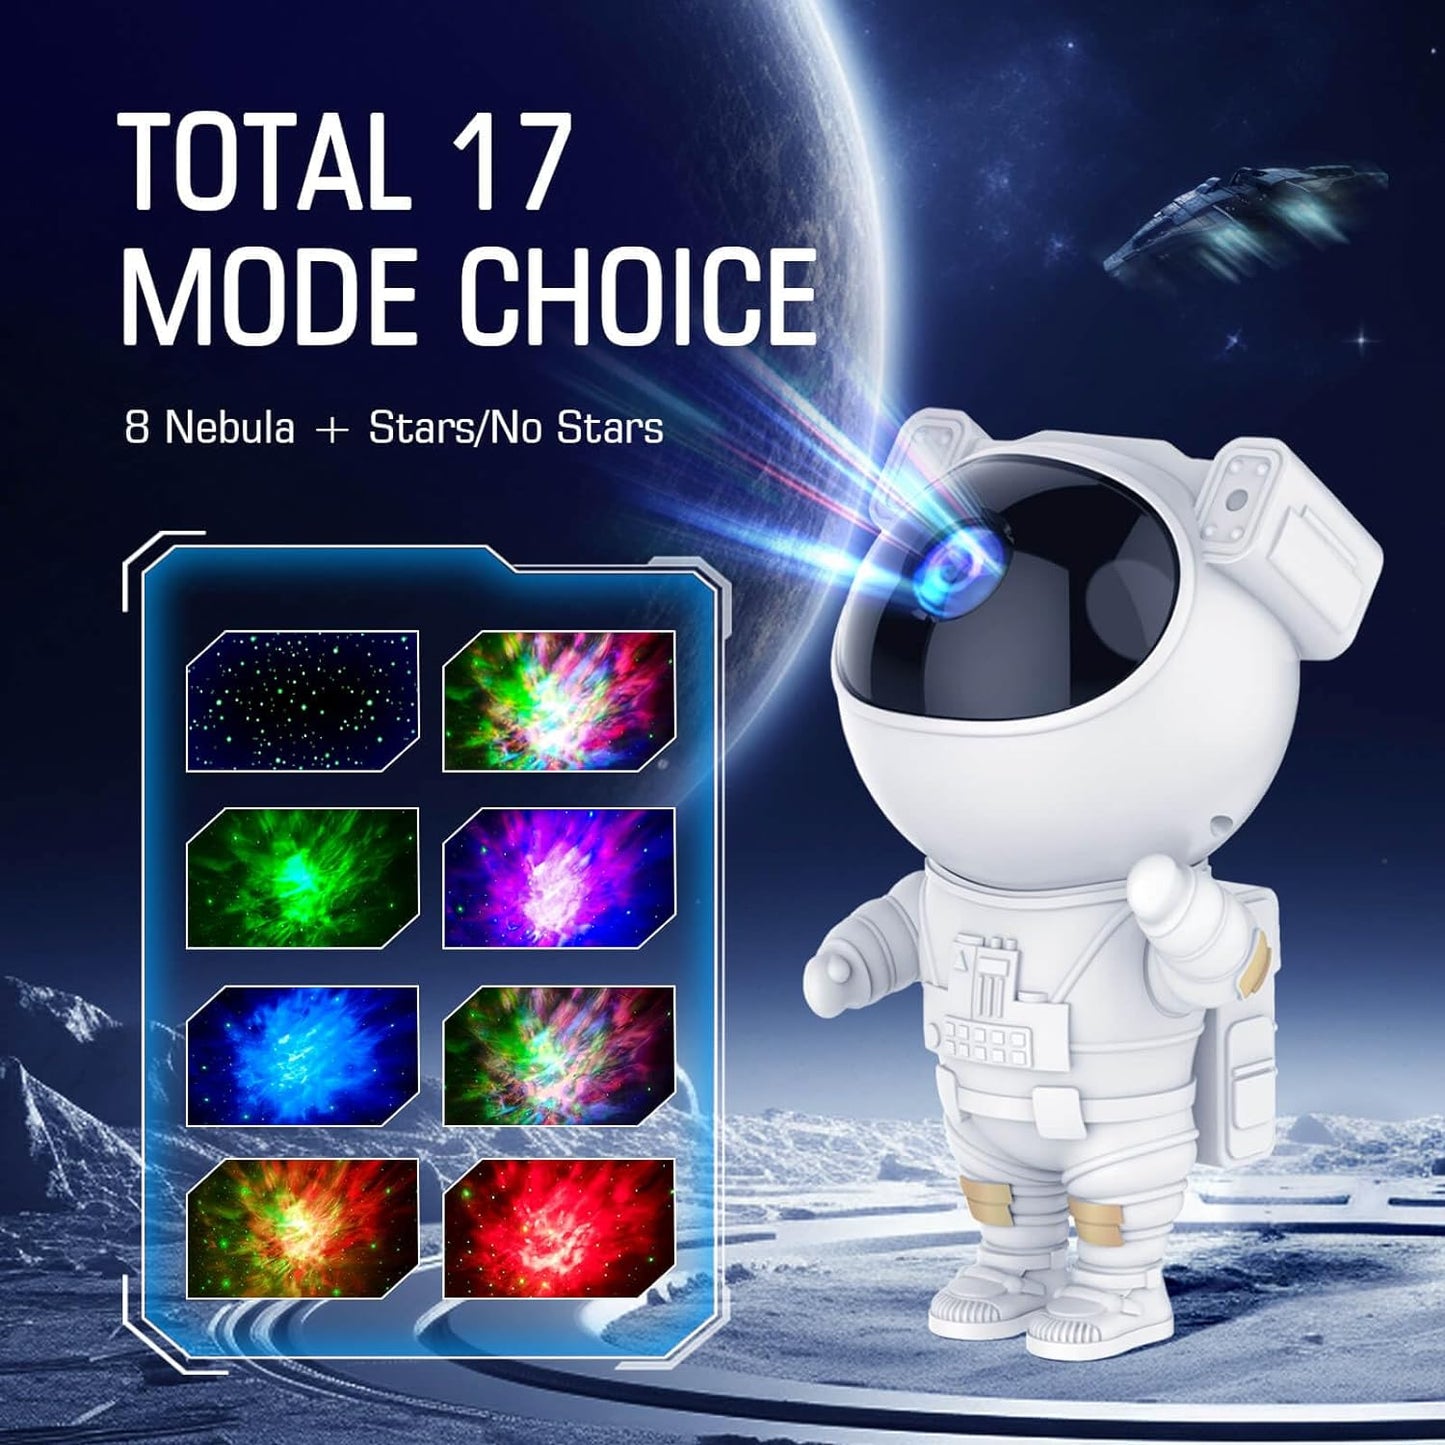 Astronaut Galaxy Projector - Star Projector, Remote Control Spaceman Night Light with Timer, for Gaming Room, Gift for Kids Adults for Bedroom, Christmas, Birthdays, Valentine's Day